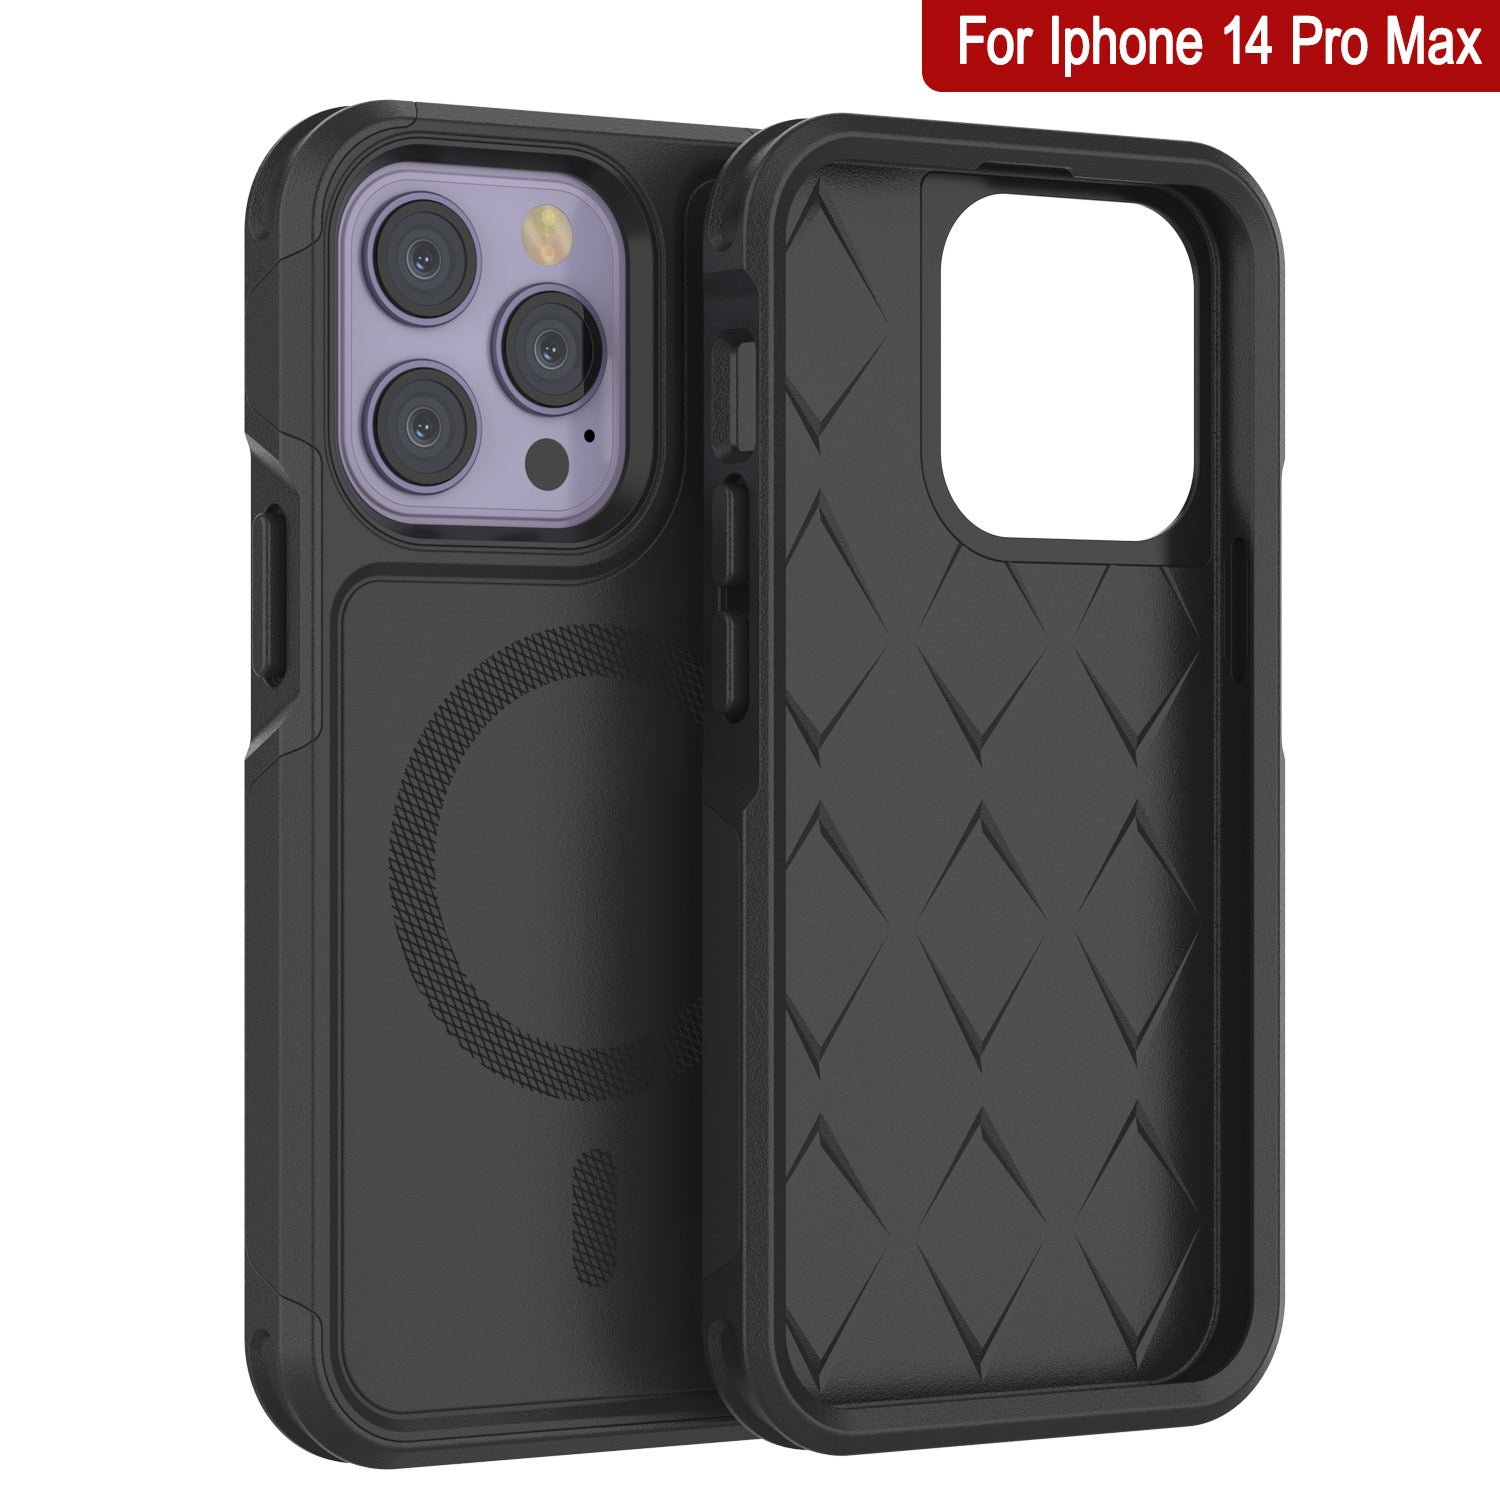 PunkCase iPhone 14 Pro Max Case, [Spartan 2.0 Series] Clear Rugged Heavy Duty Cover W/Built in Screen Protector [Black]